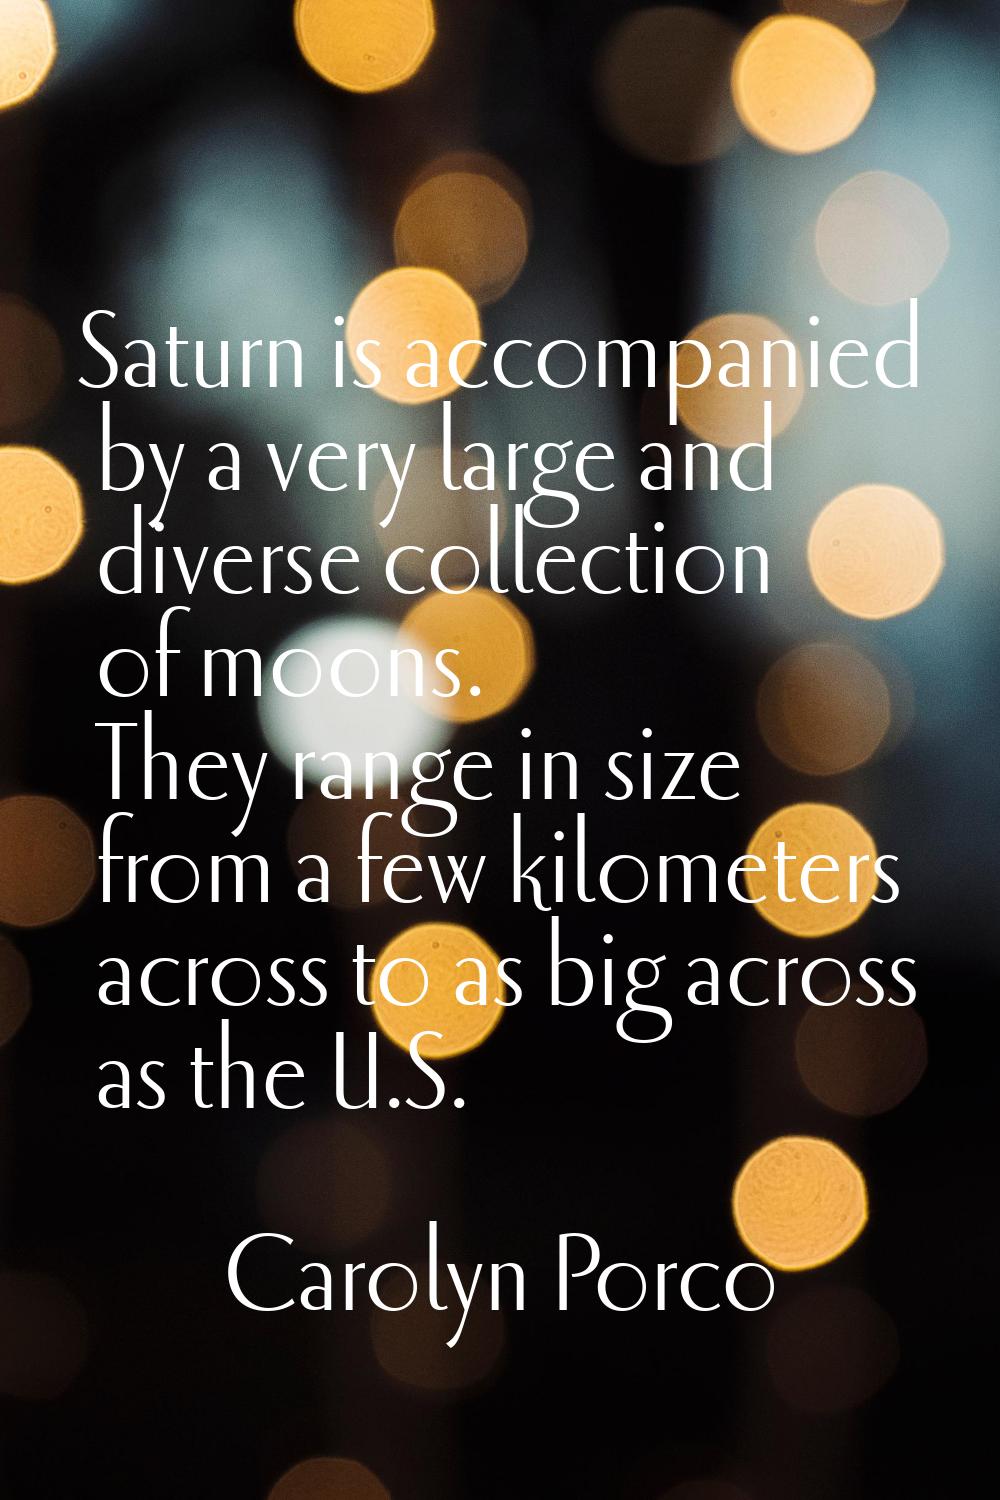 Saturn is accompanied by a very large and diverse collection of moons. They range in size from a fe